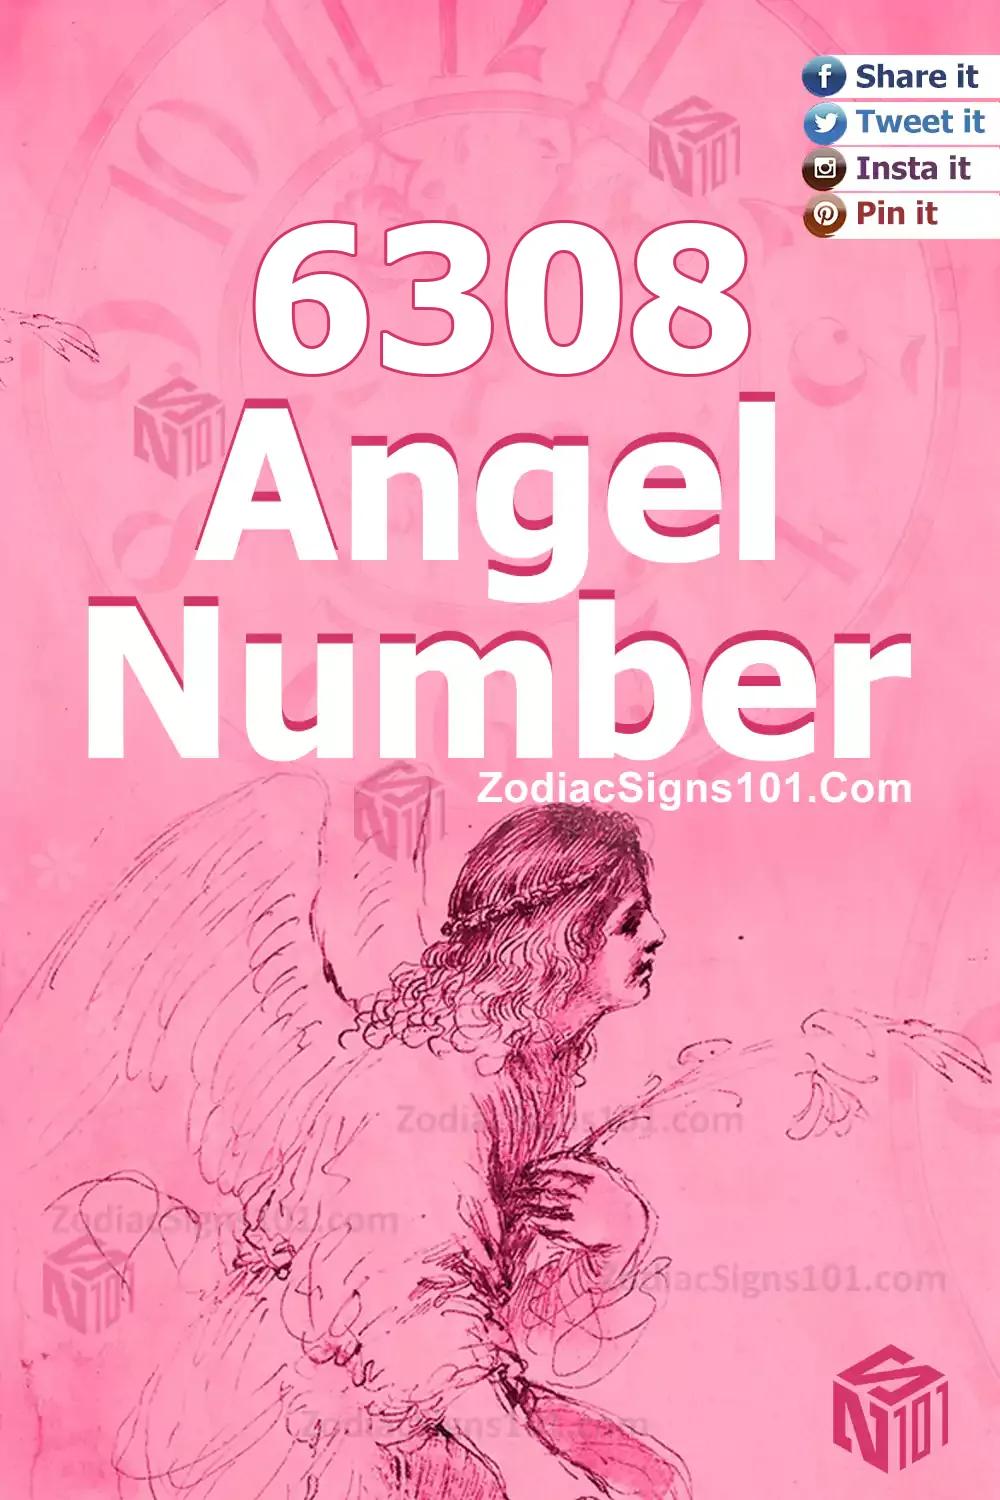 6308 Angel Number Meaning